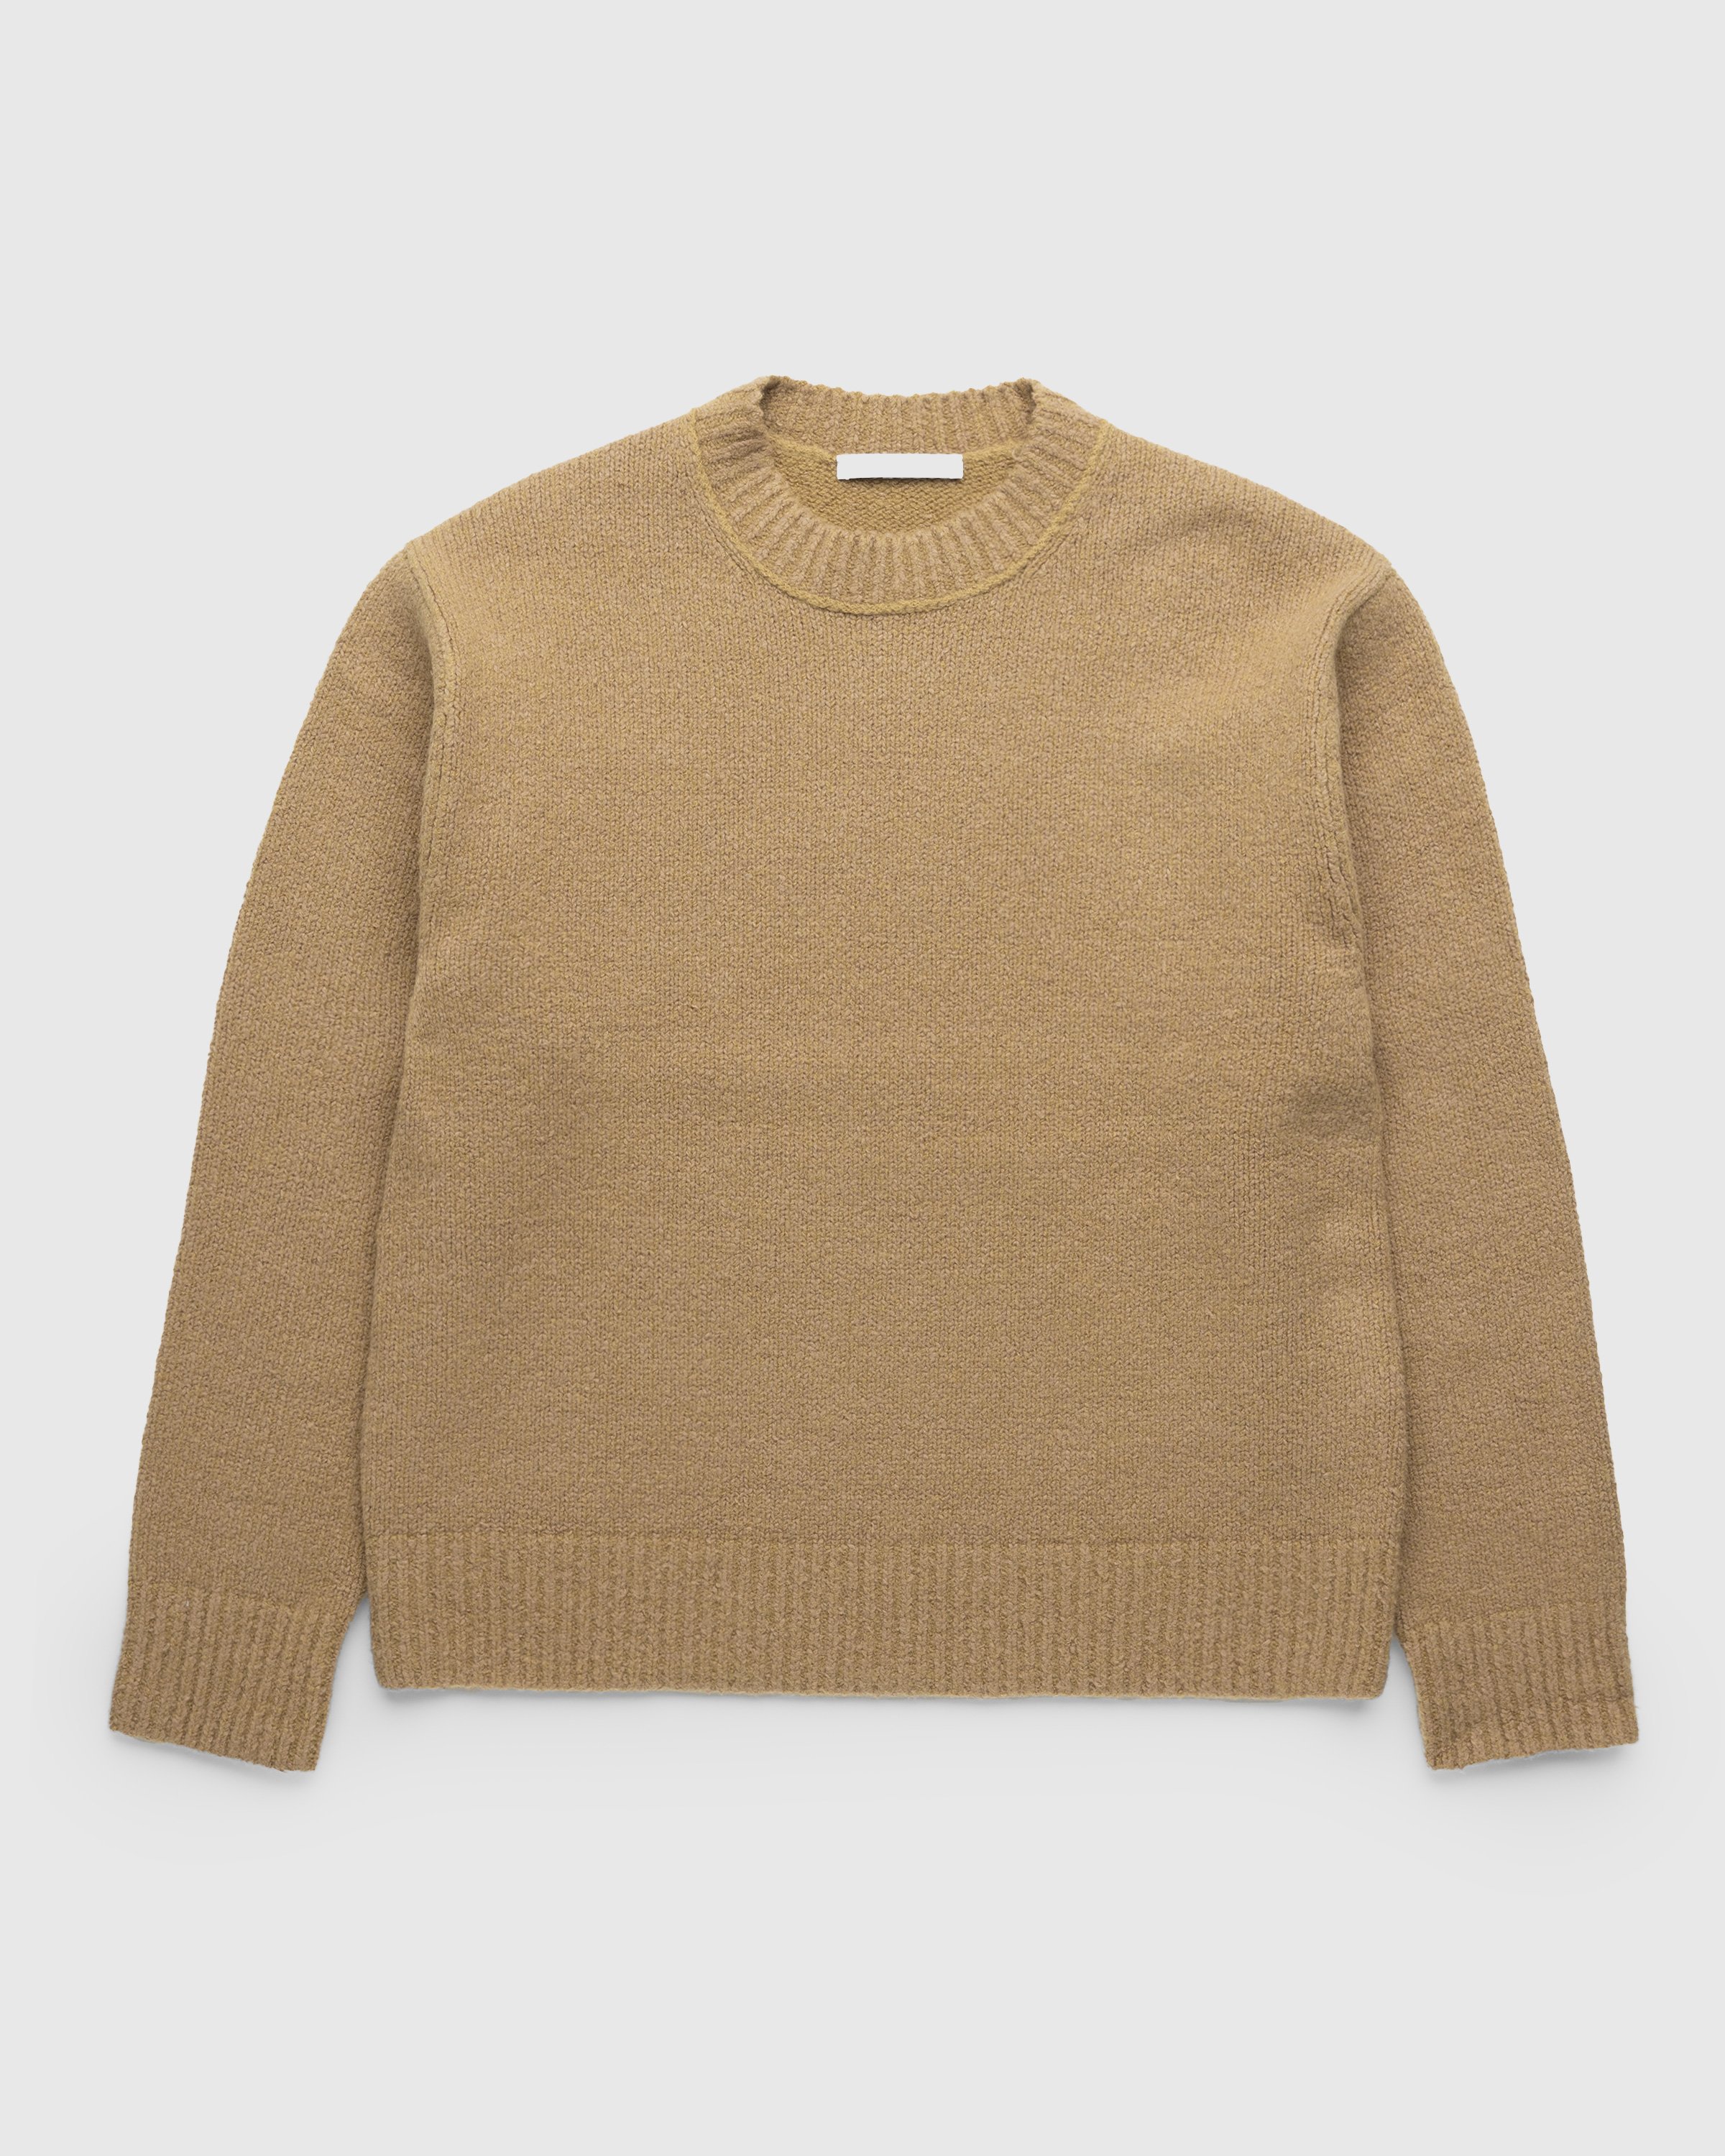 Acne Studios - FN-MN-KNIT000441 - Clothing - Brown - Image 1